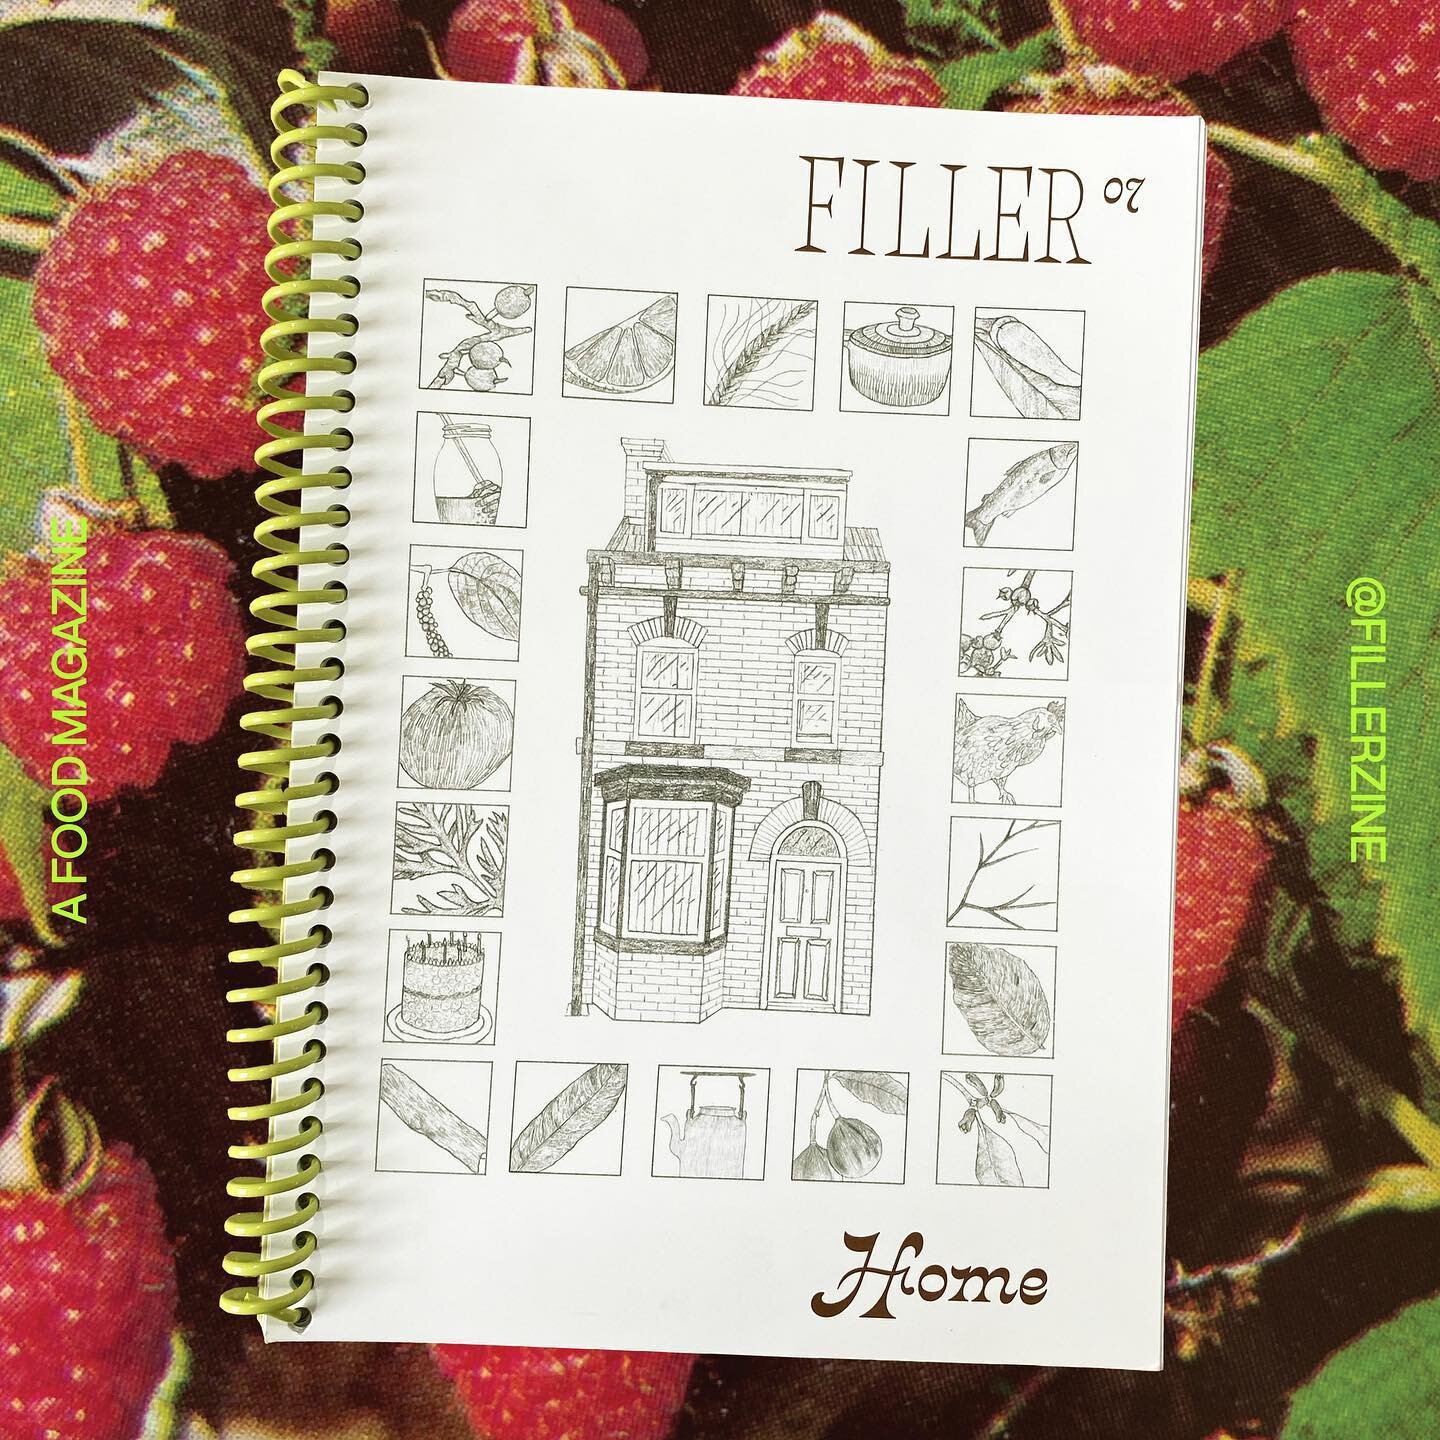 Very excited to be included in the @fillerzine issue of &ldquo;Home&rdquo;! If you&rsquo;re in Manchester make sure to stop by @unitomstore for the launch evening this Thursday🕺🥂 🎊 

You will be able to find the new @fillerzine issue in some of yo